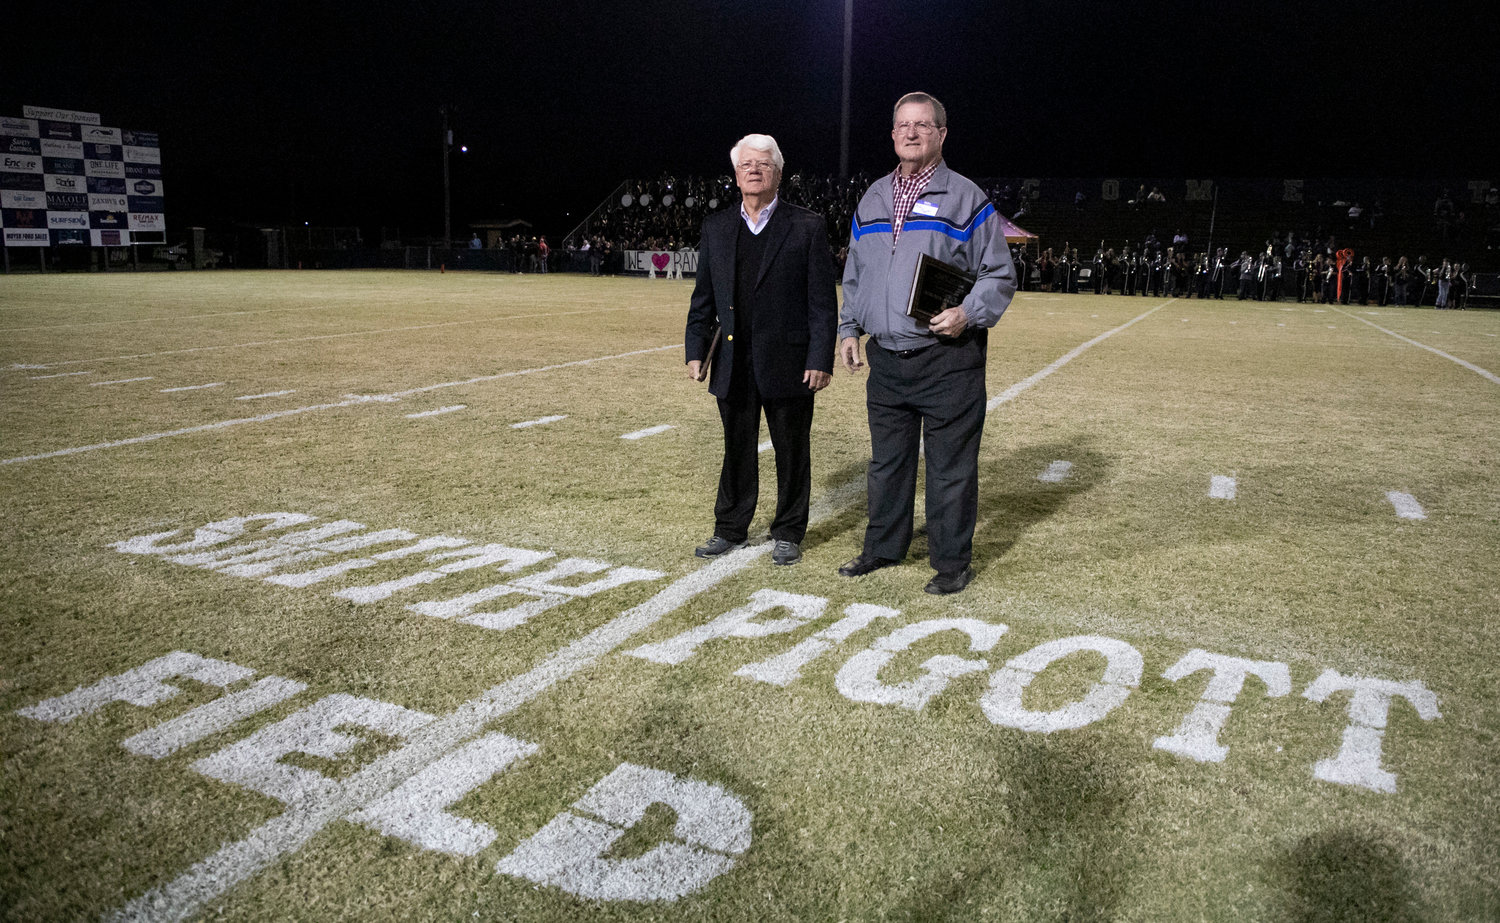 Former Foley head coach Lester Smith and defensive coordinator Bud Pigott were recognized with the unveiling of the newly named field at Ivan Jones Stadium Friday, Oct. 22, before the Lions’ region game against the Daphne Trojans.